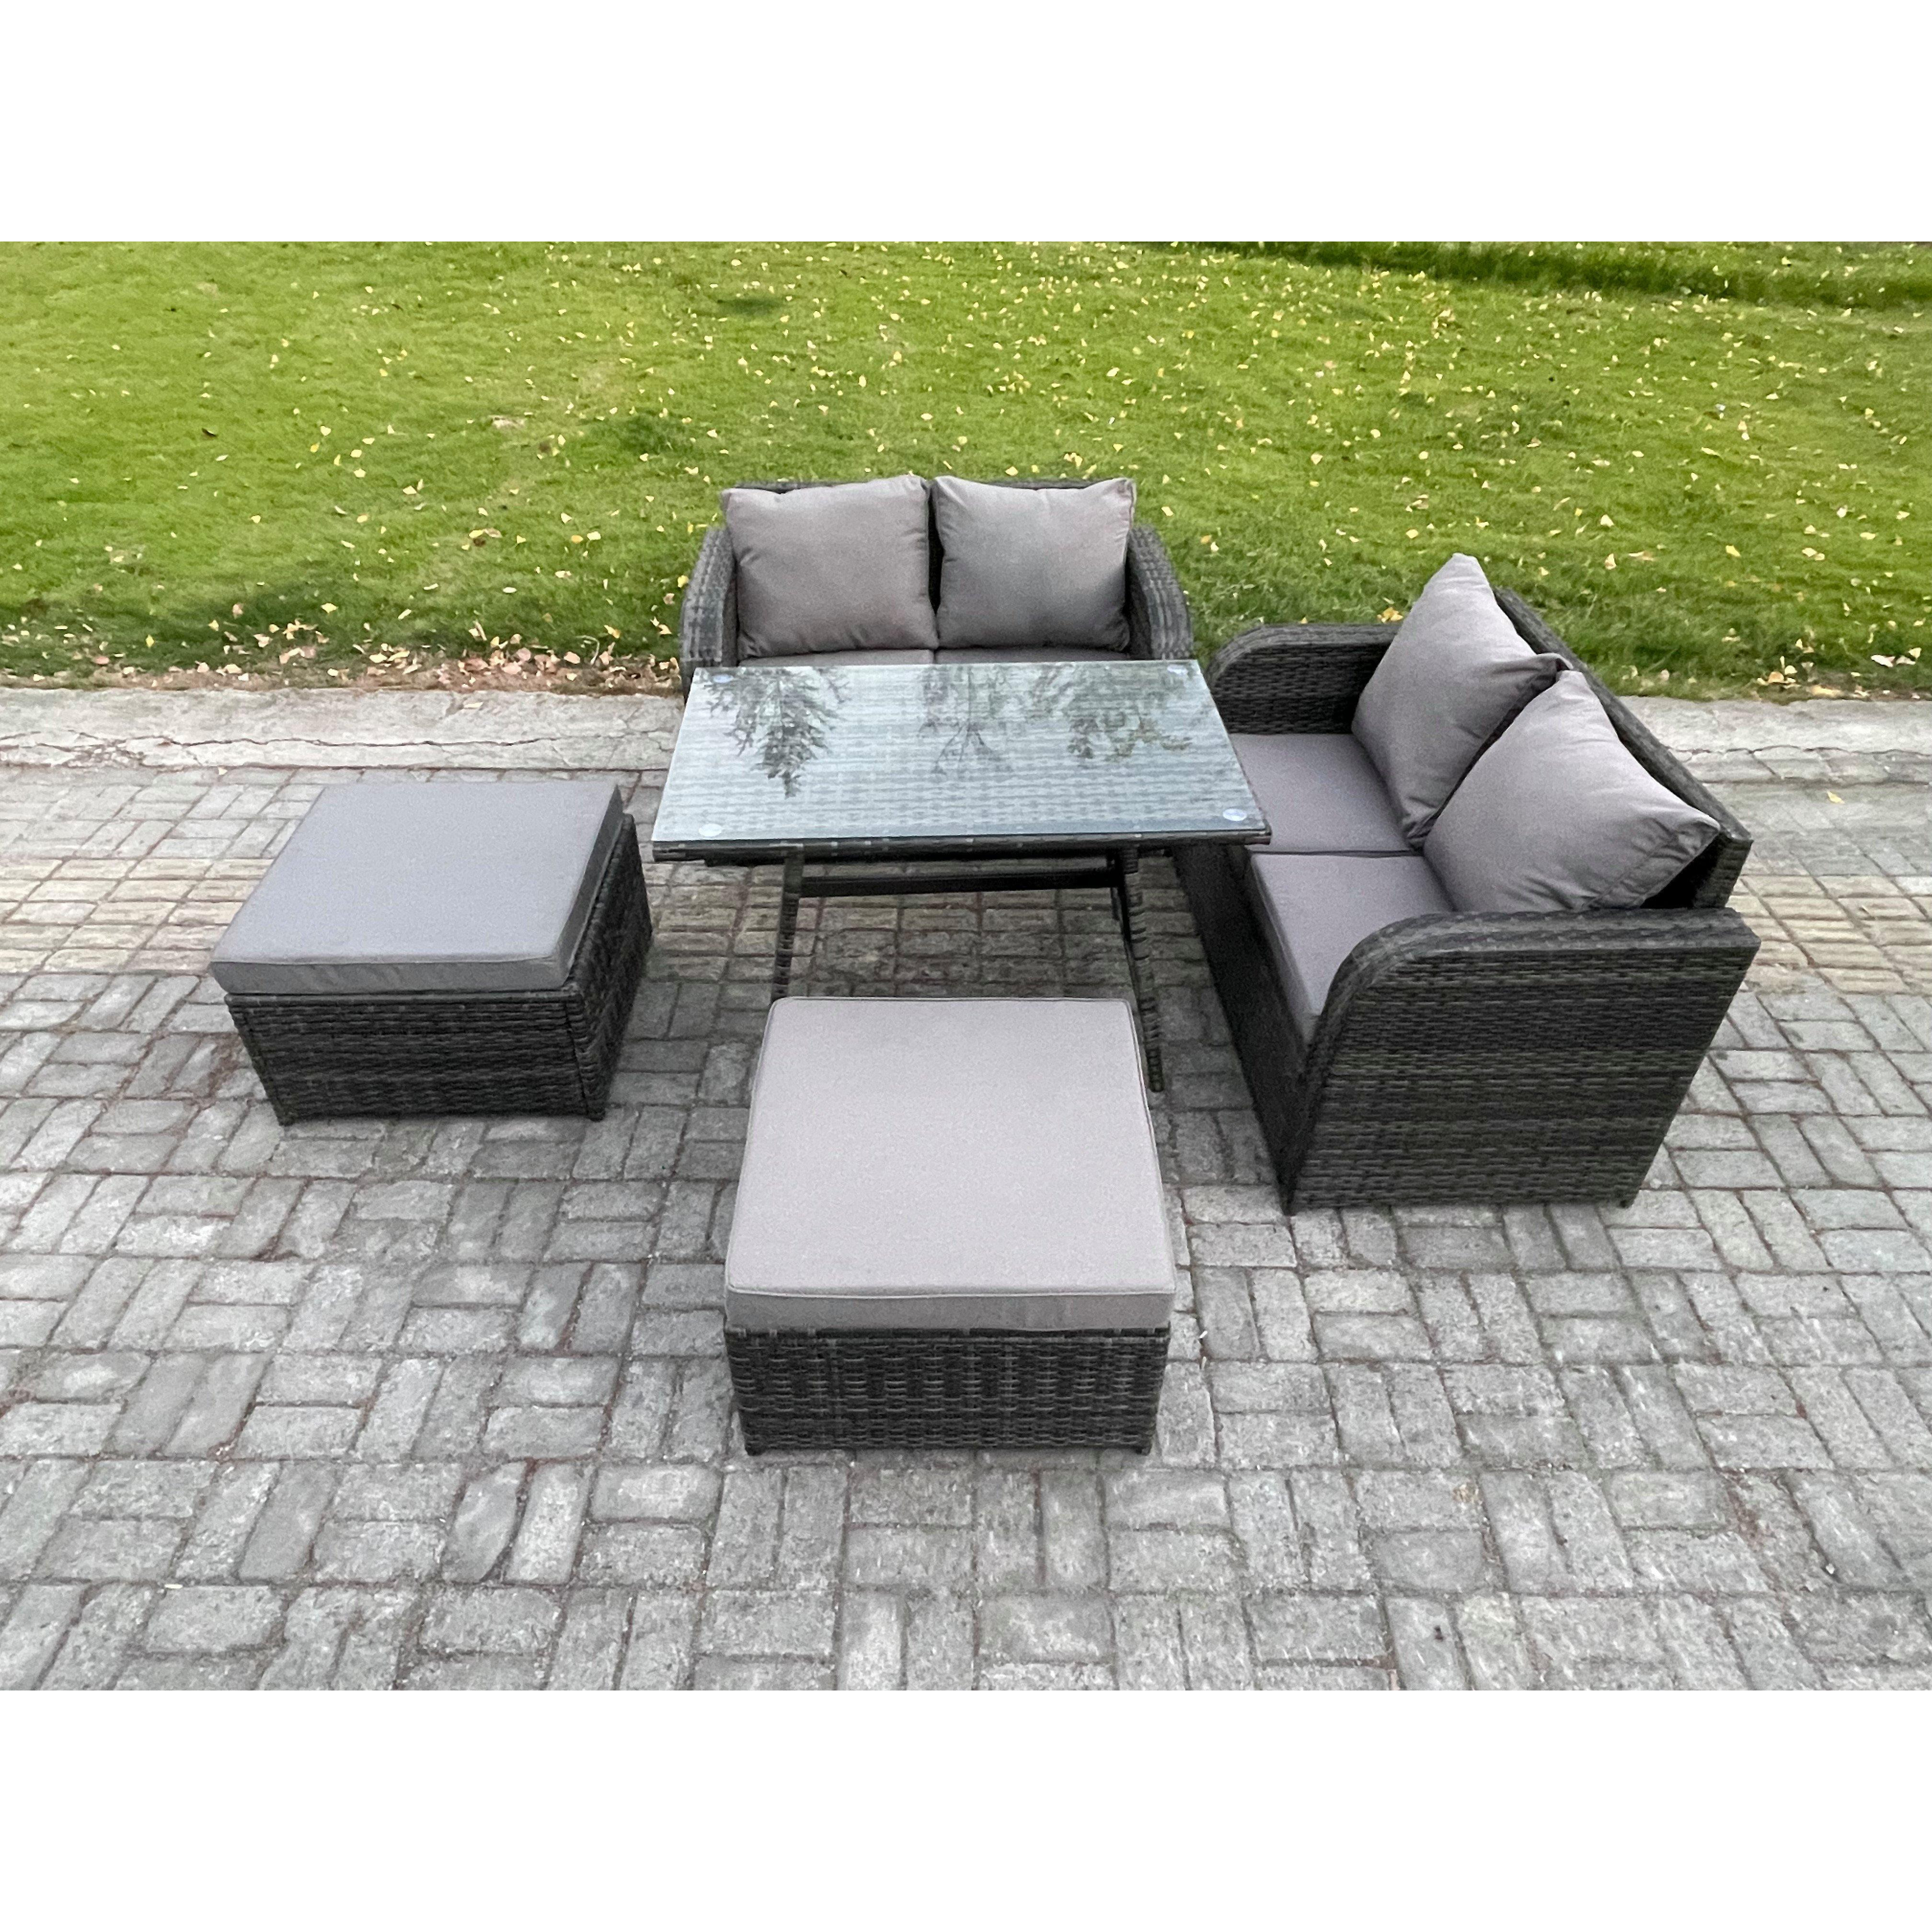 Outdoor Garden Furniture Sets 5 Pieces Wicker Rattan Furniture Sofa Sets with Rectangular Dining Table Love Sofa - image 1